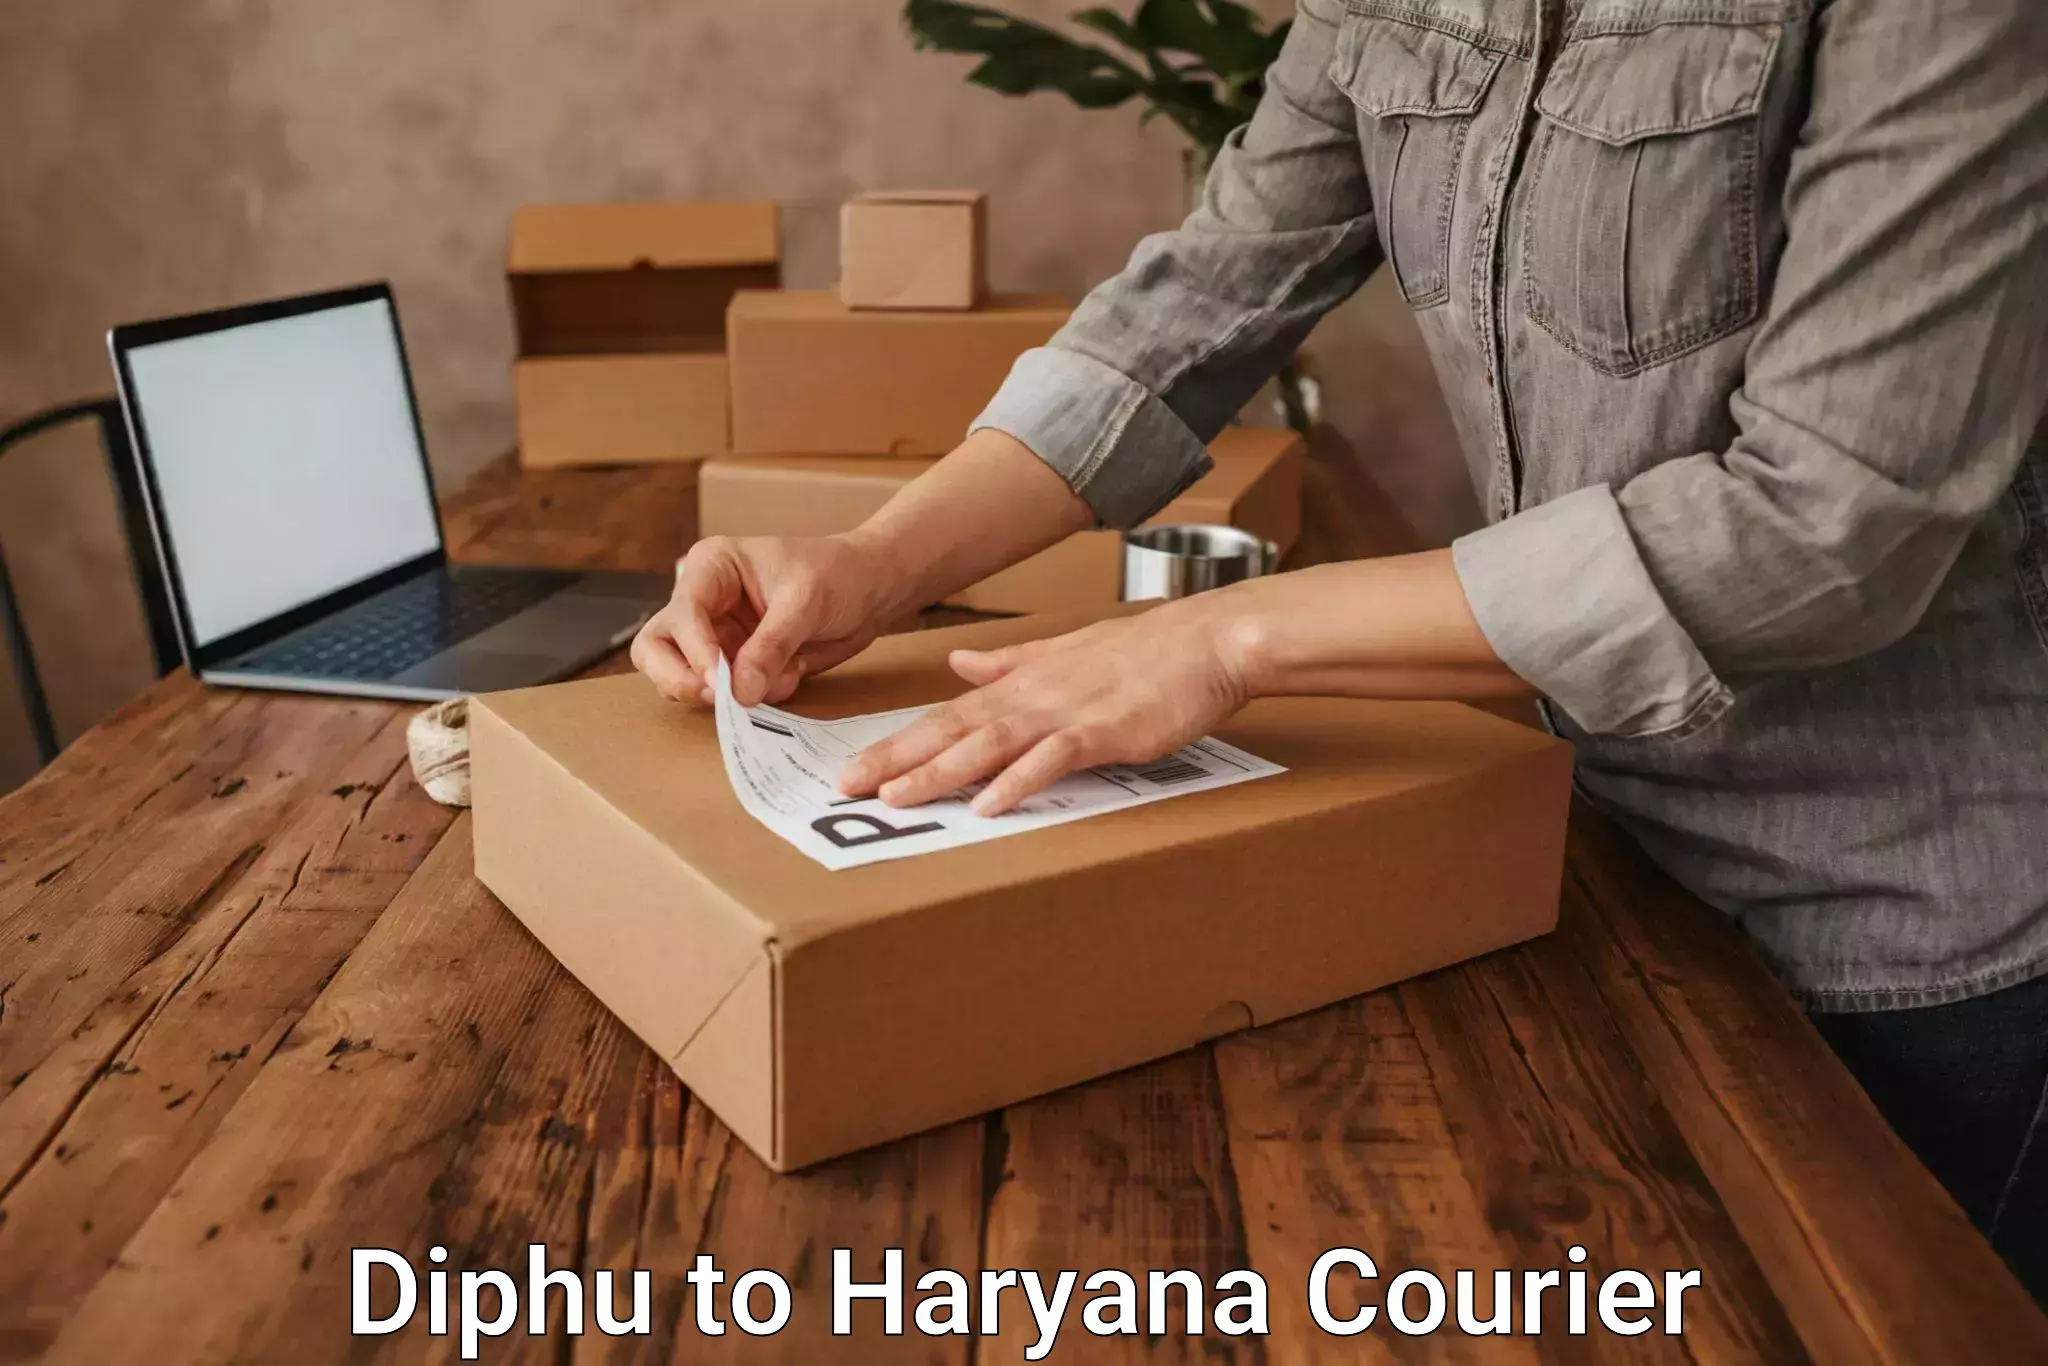 Courier service comparison in Diphu to Hansi